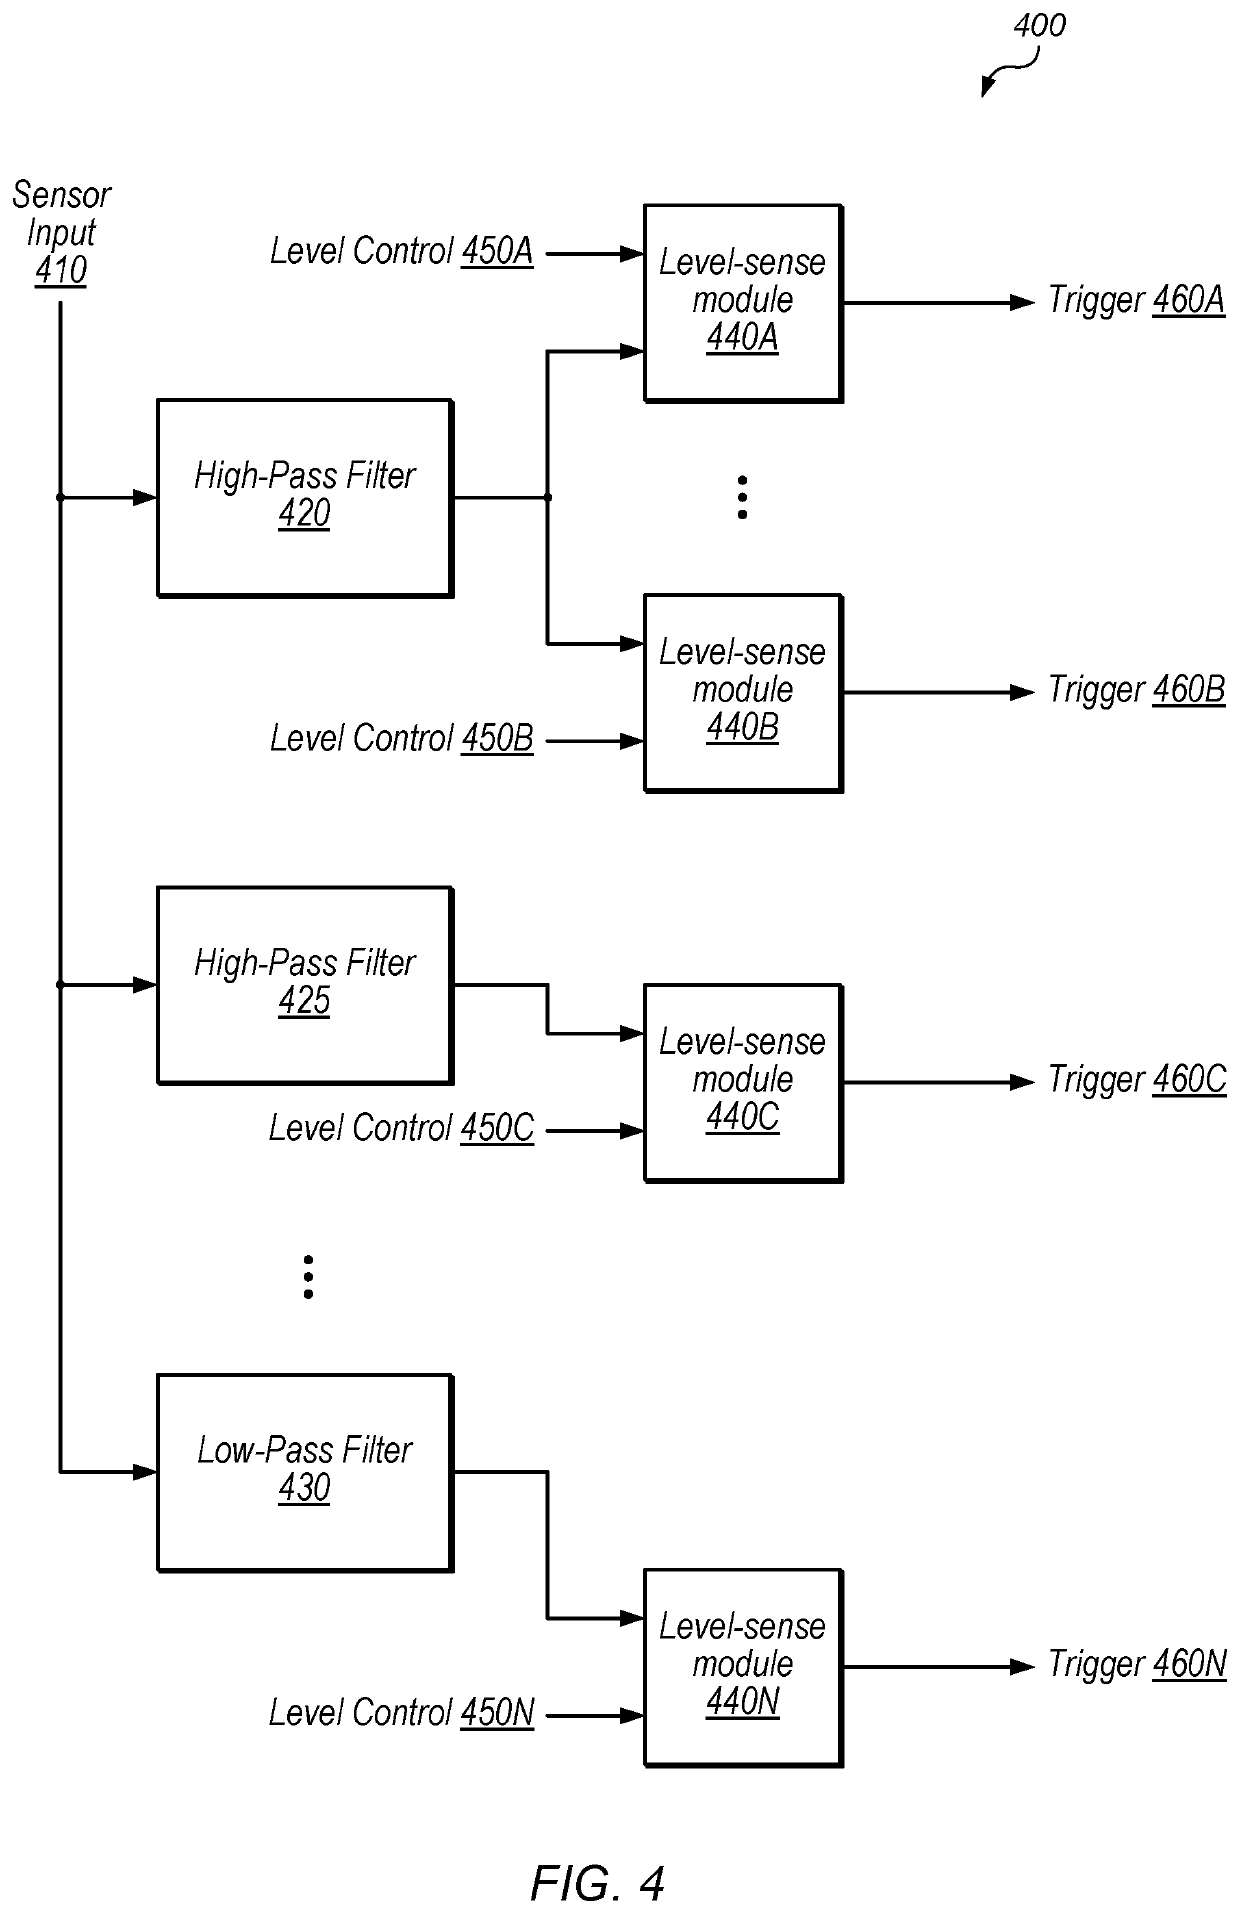 Detecting power supply noise events and initiating corrective action